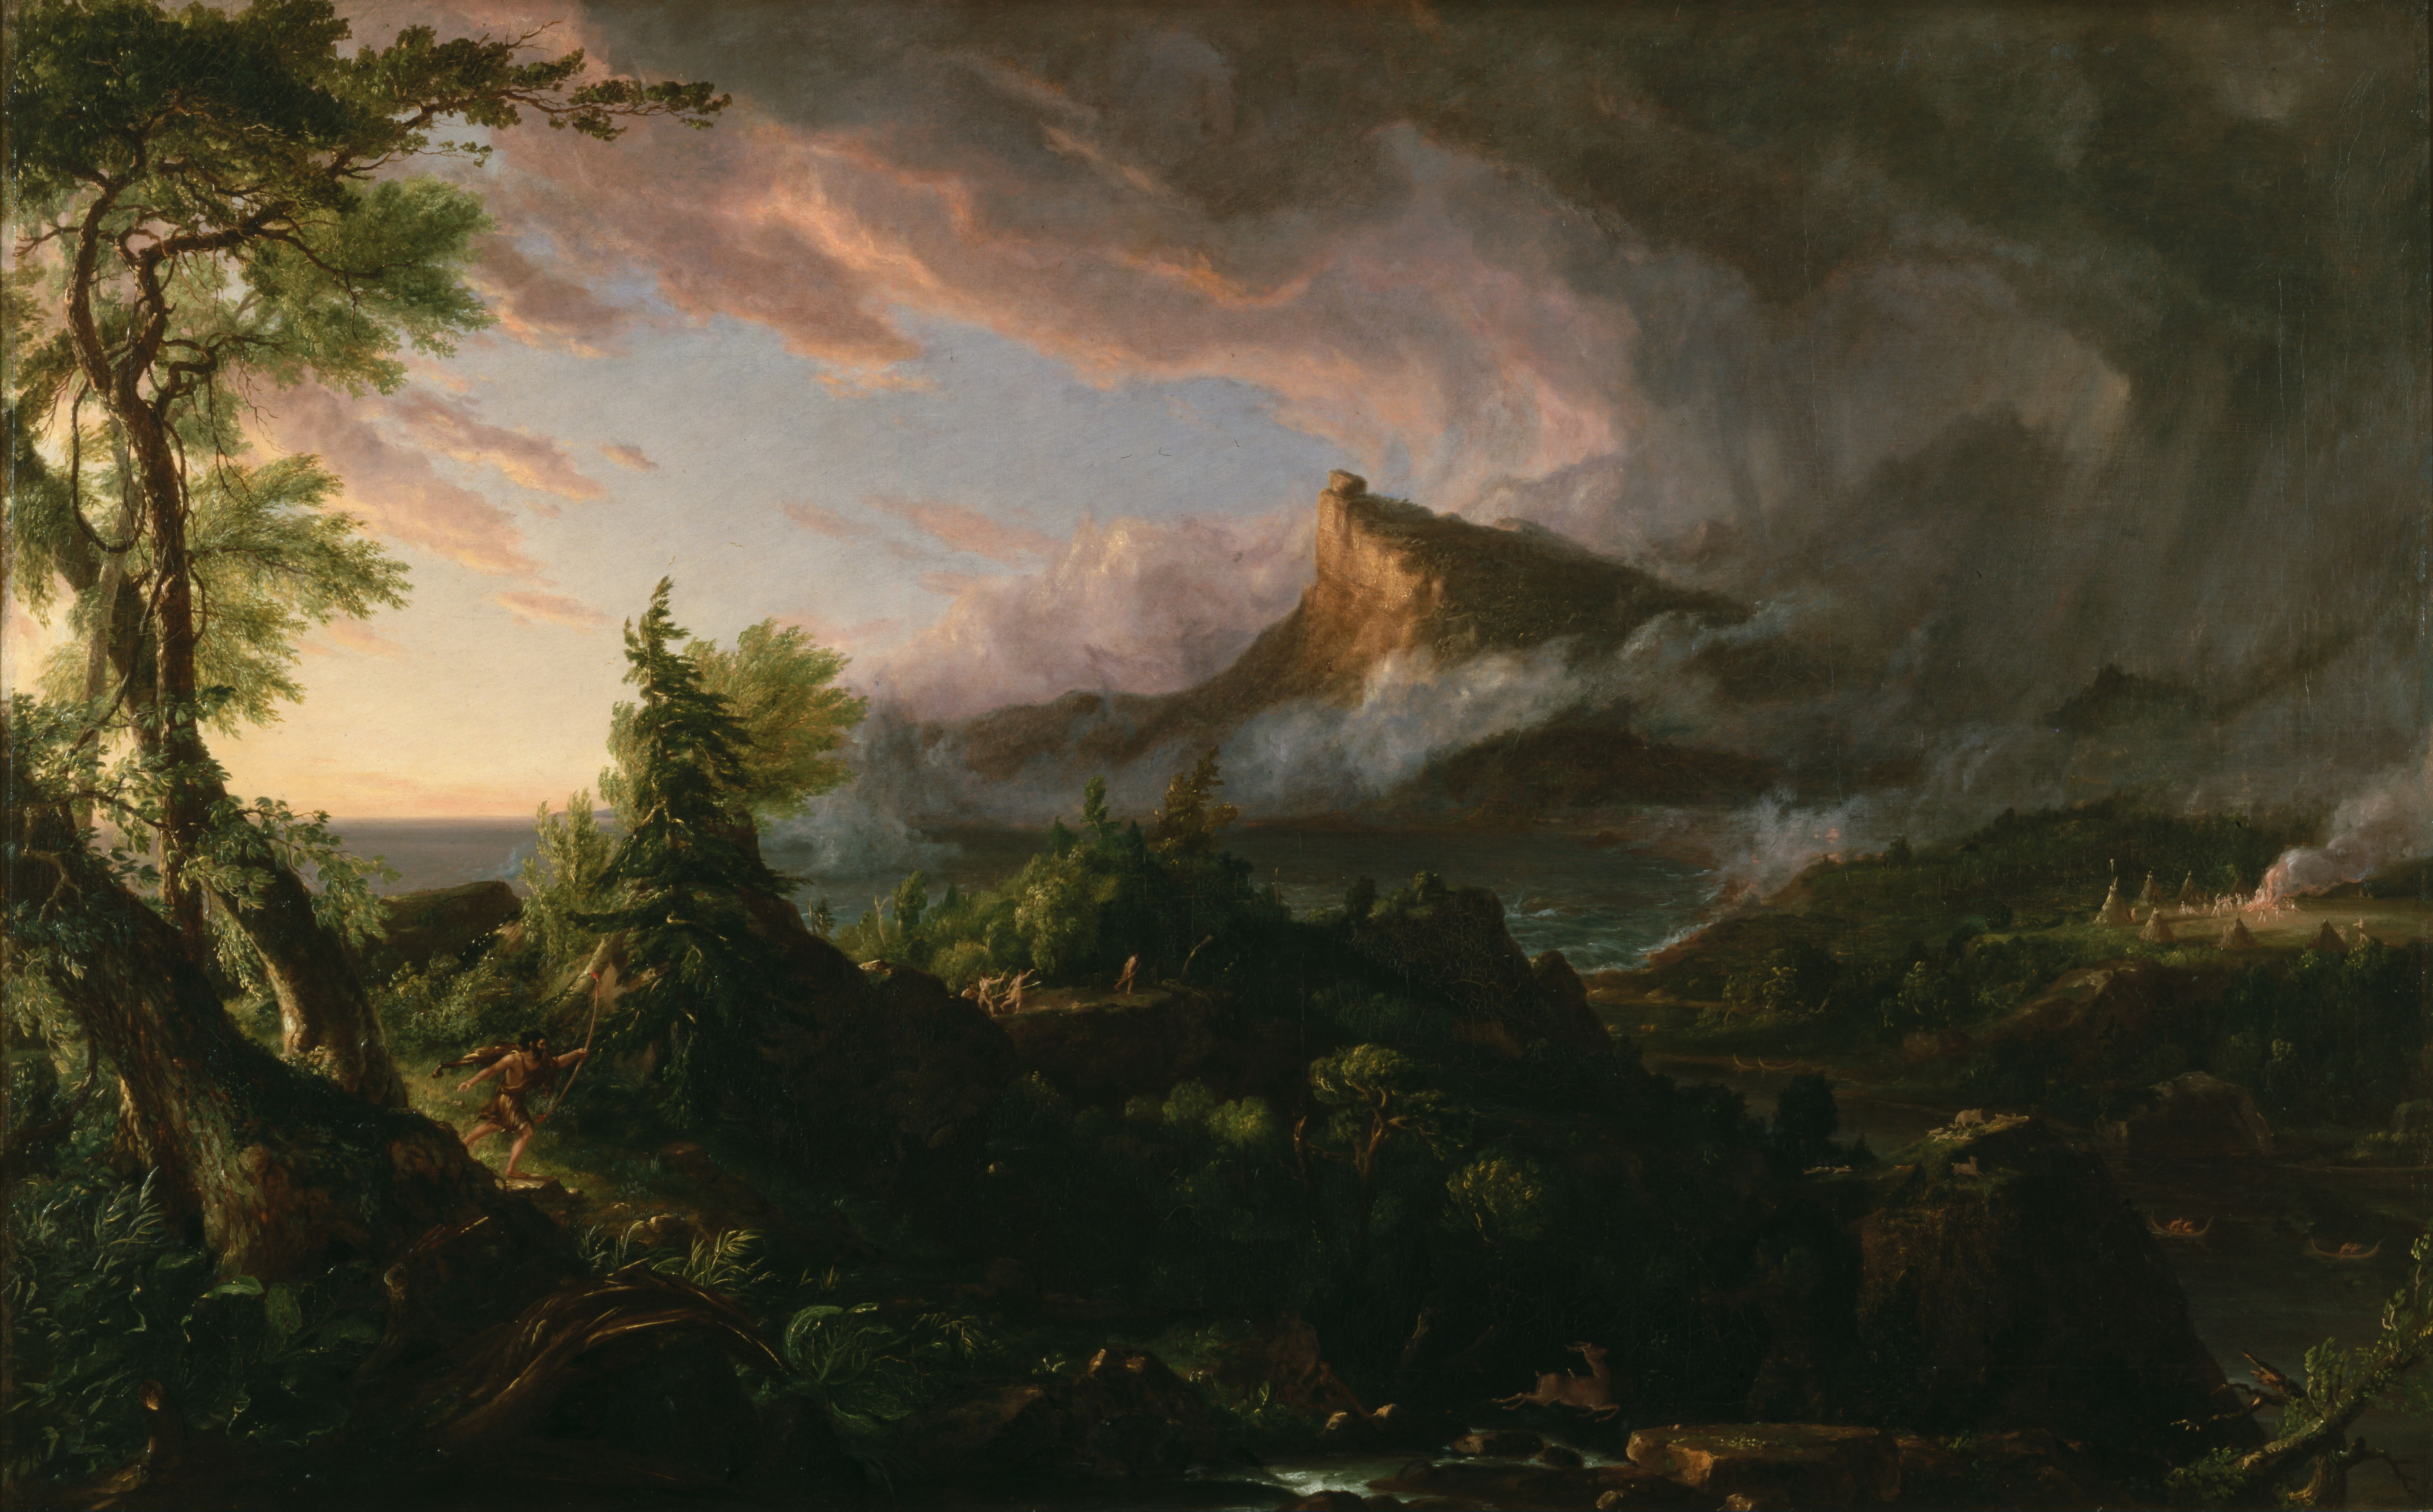 Thomas Cole, The Course of Empire – The Savage State, 1833–1836. (Image source: Wikipedia).